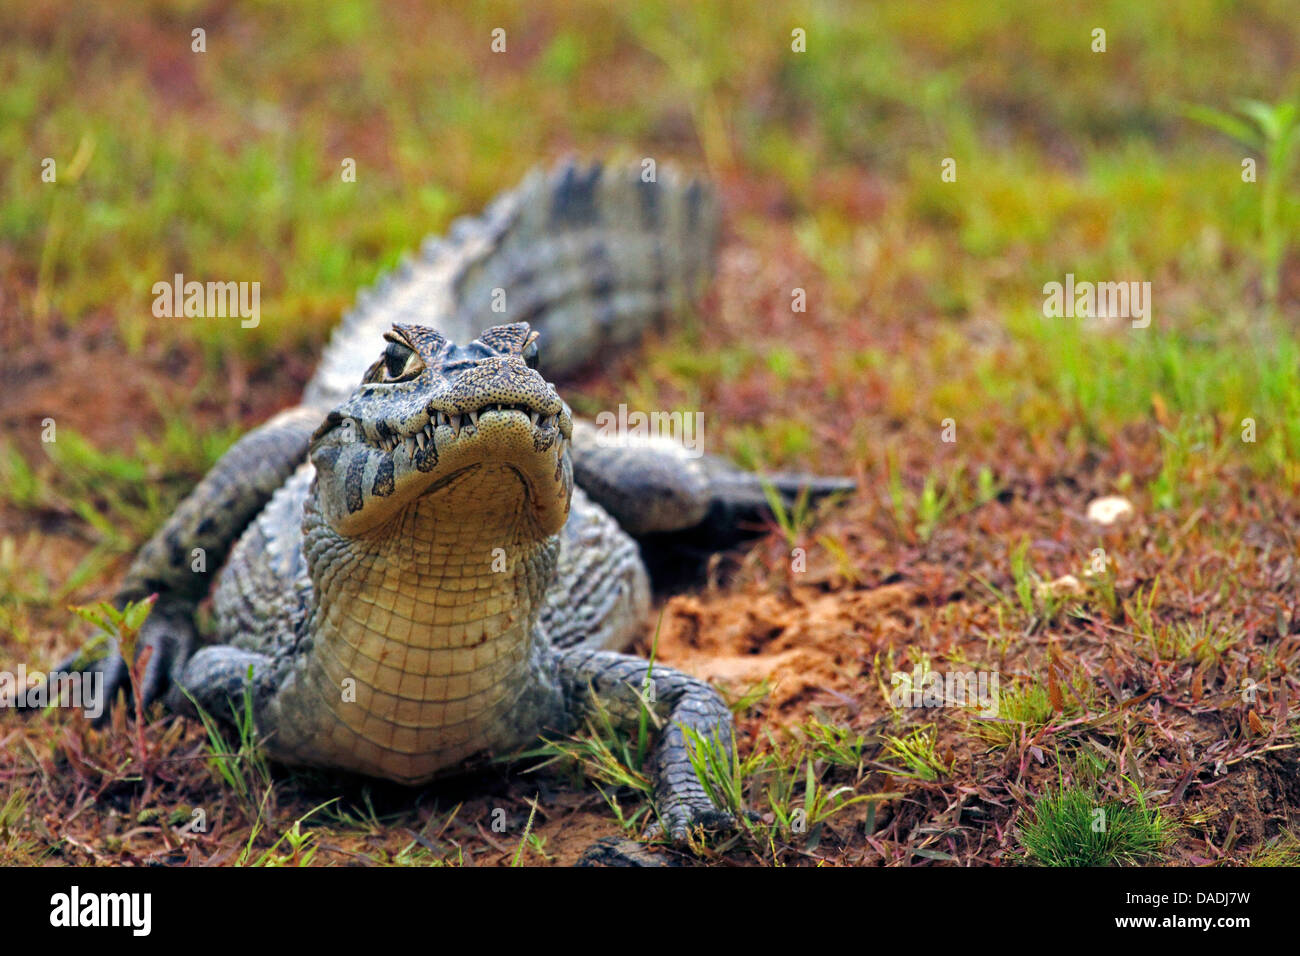 spectacled caiman (Caiman crocodilus), Caiman laying on river bank, Brazil, Mato Grosso, Pantanal Stock Photo